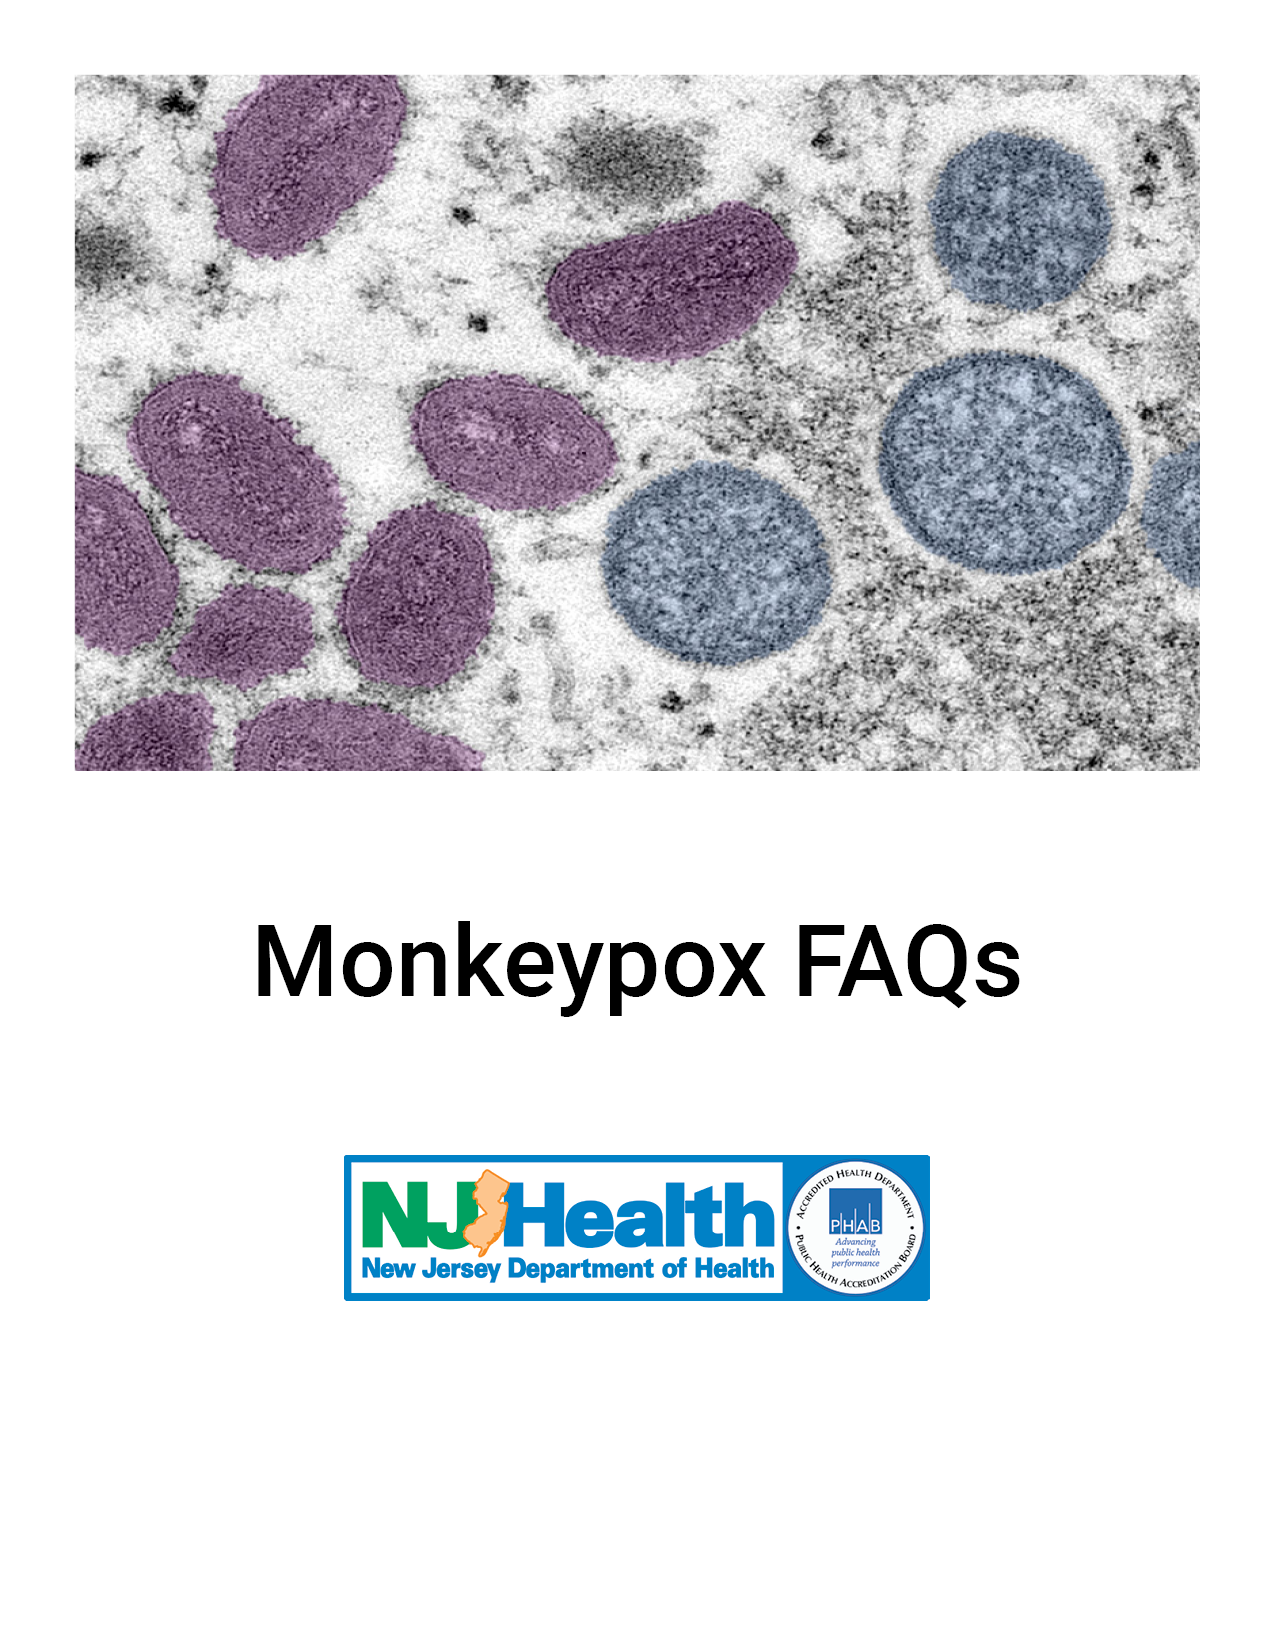 Monkeypox Information and Resources